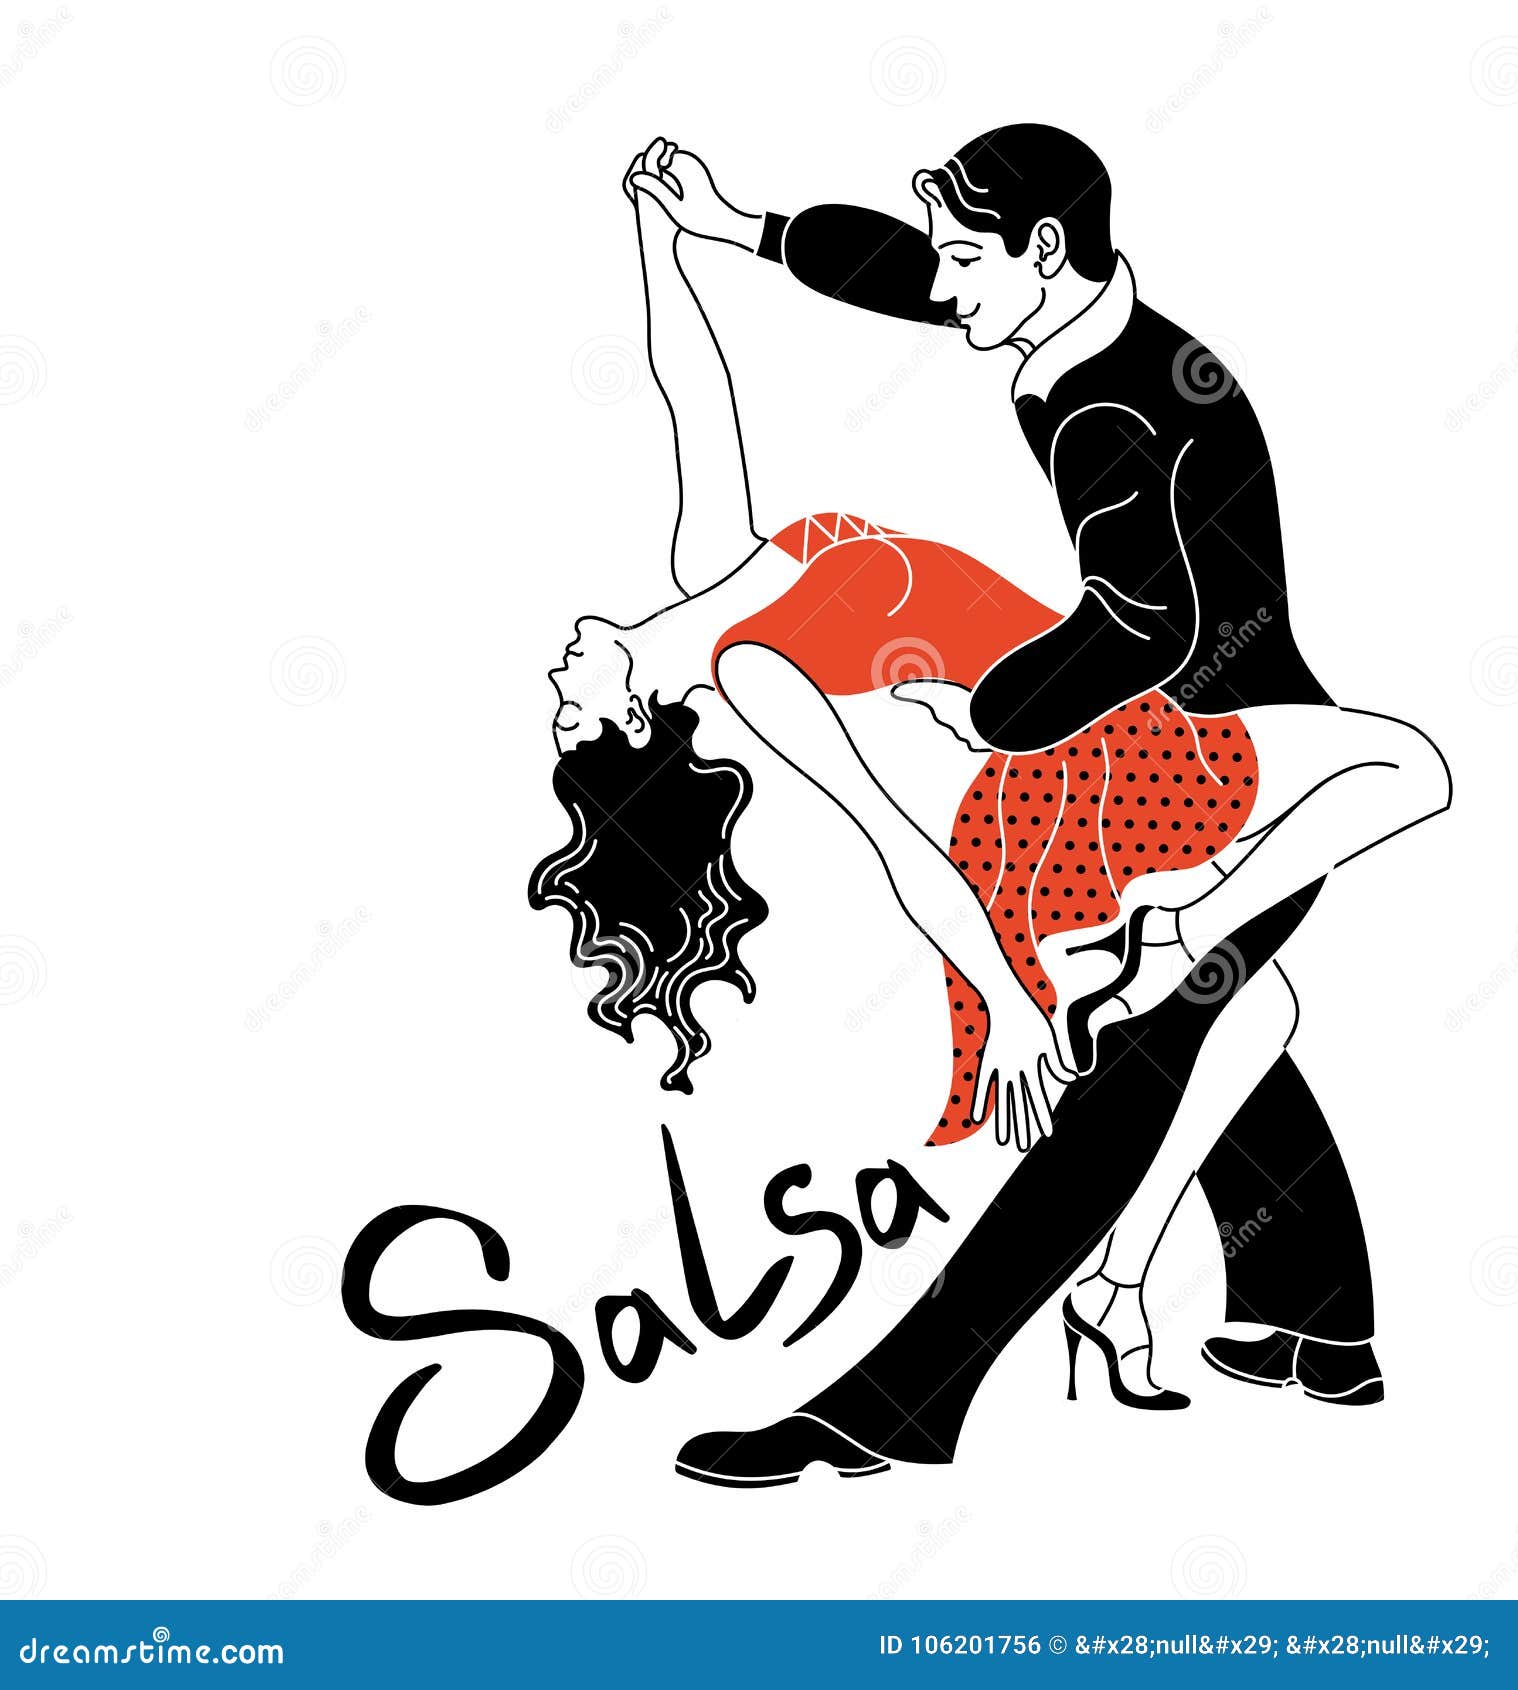 salsa party dance poster. elegant couple dancing salsa. retro style. silhouettes of people dancing salsa fishnet stockings